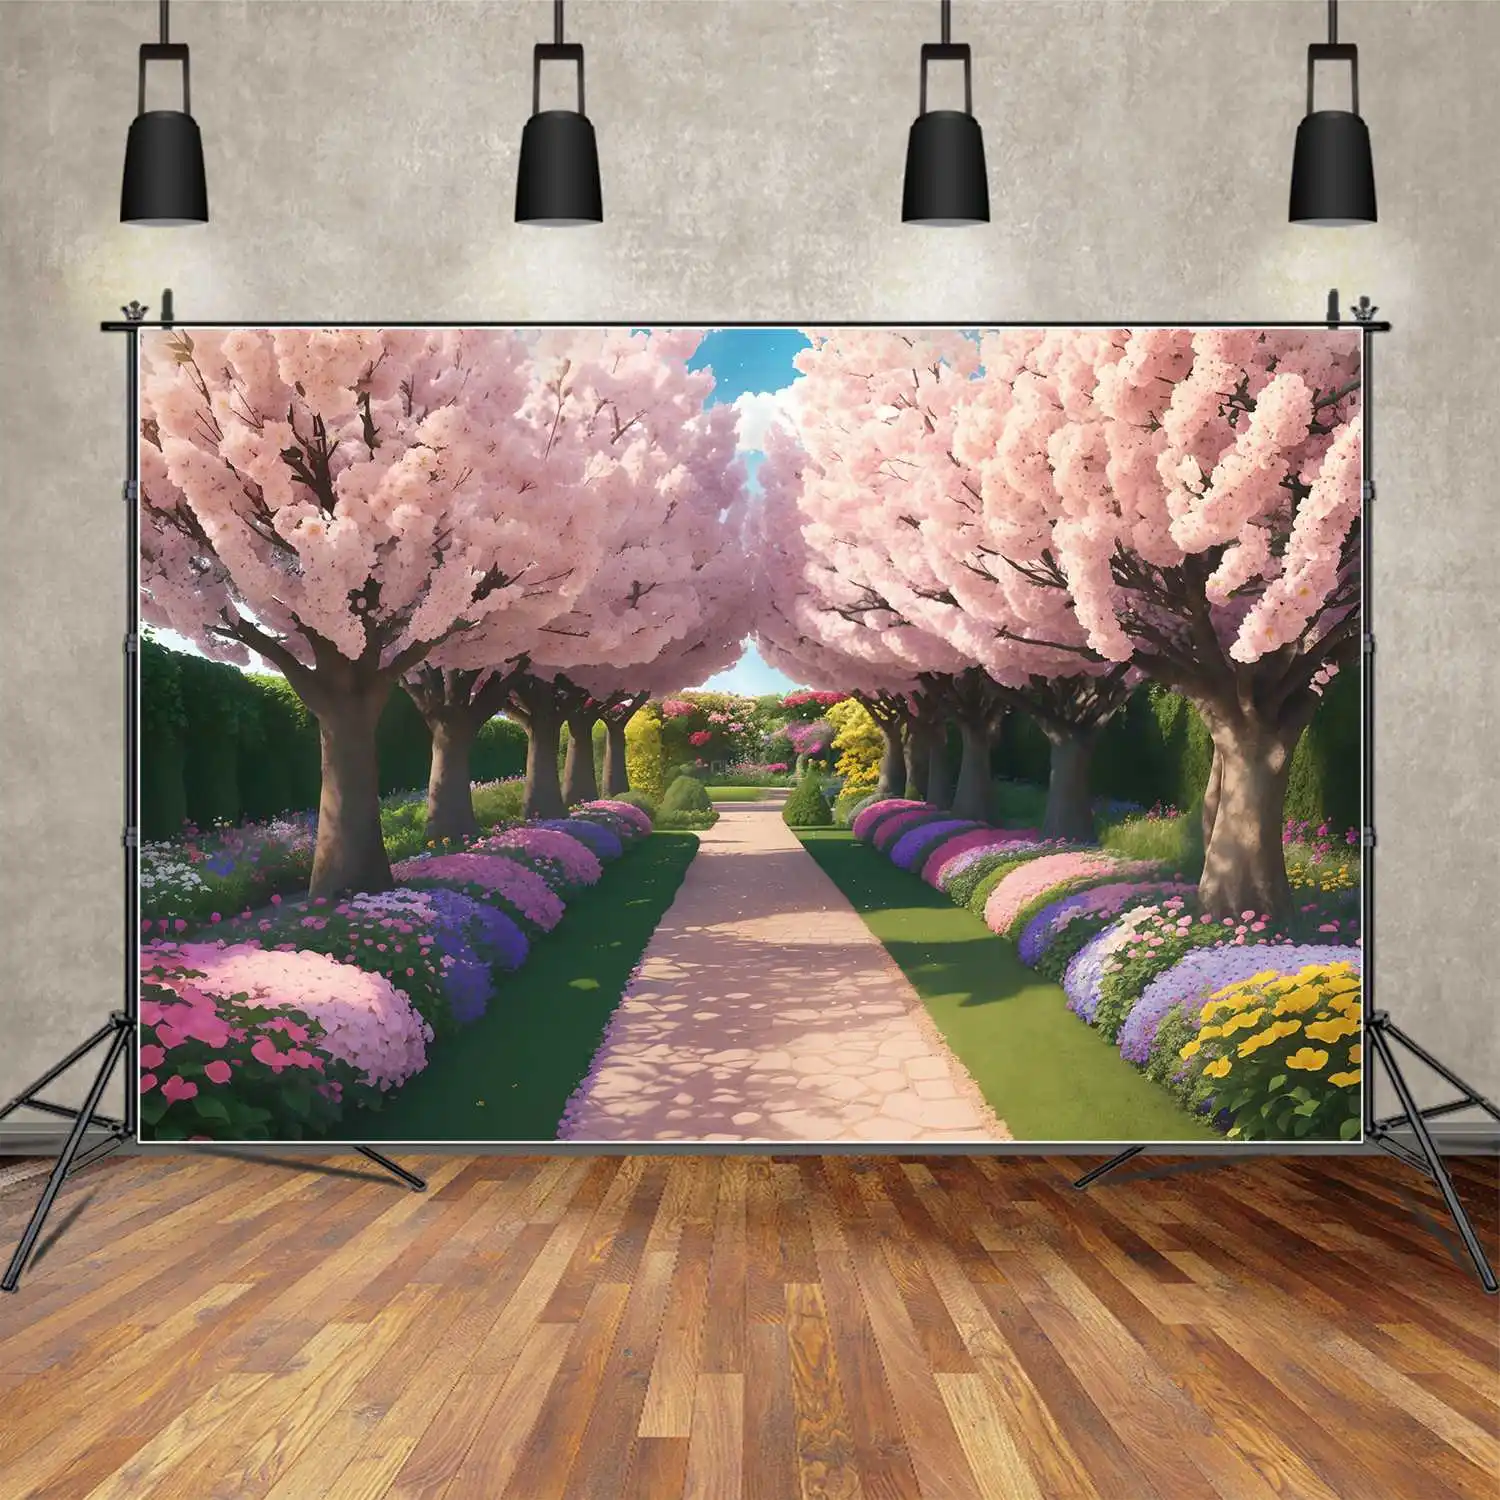 

Spring Pink Blossom Road Backdrops Photography Decor Garden Park Floral Flowers Custom Baby Photobooth Photographic Backgrounds